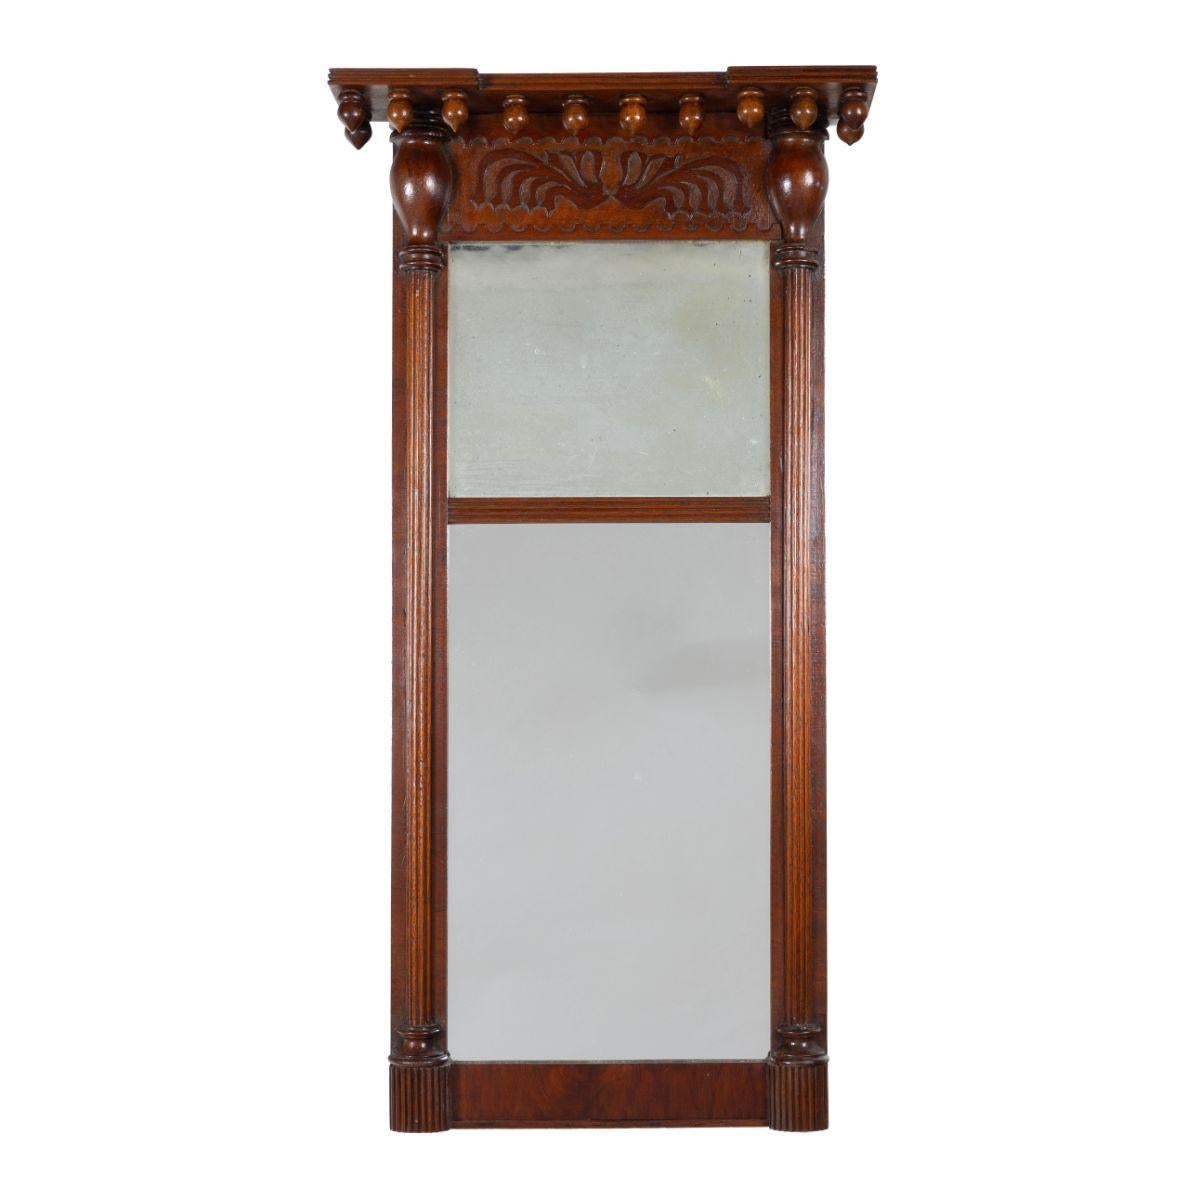 Early 19th Century American Mahogany Tabernacle Pier Mirror For Sale 1